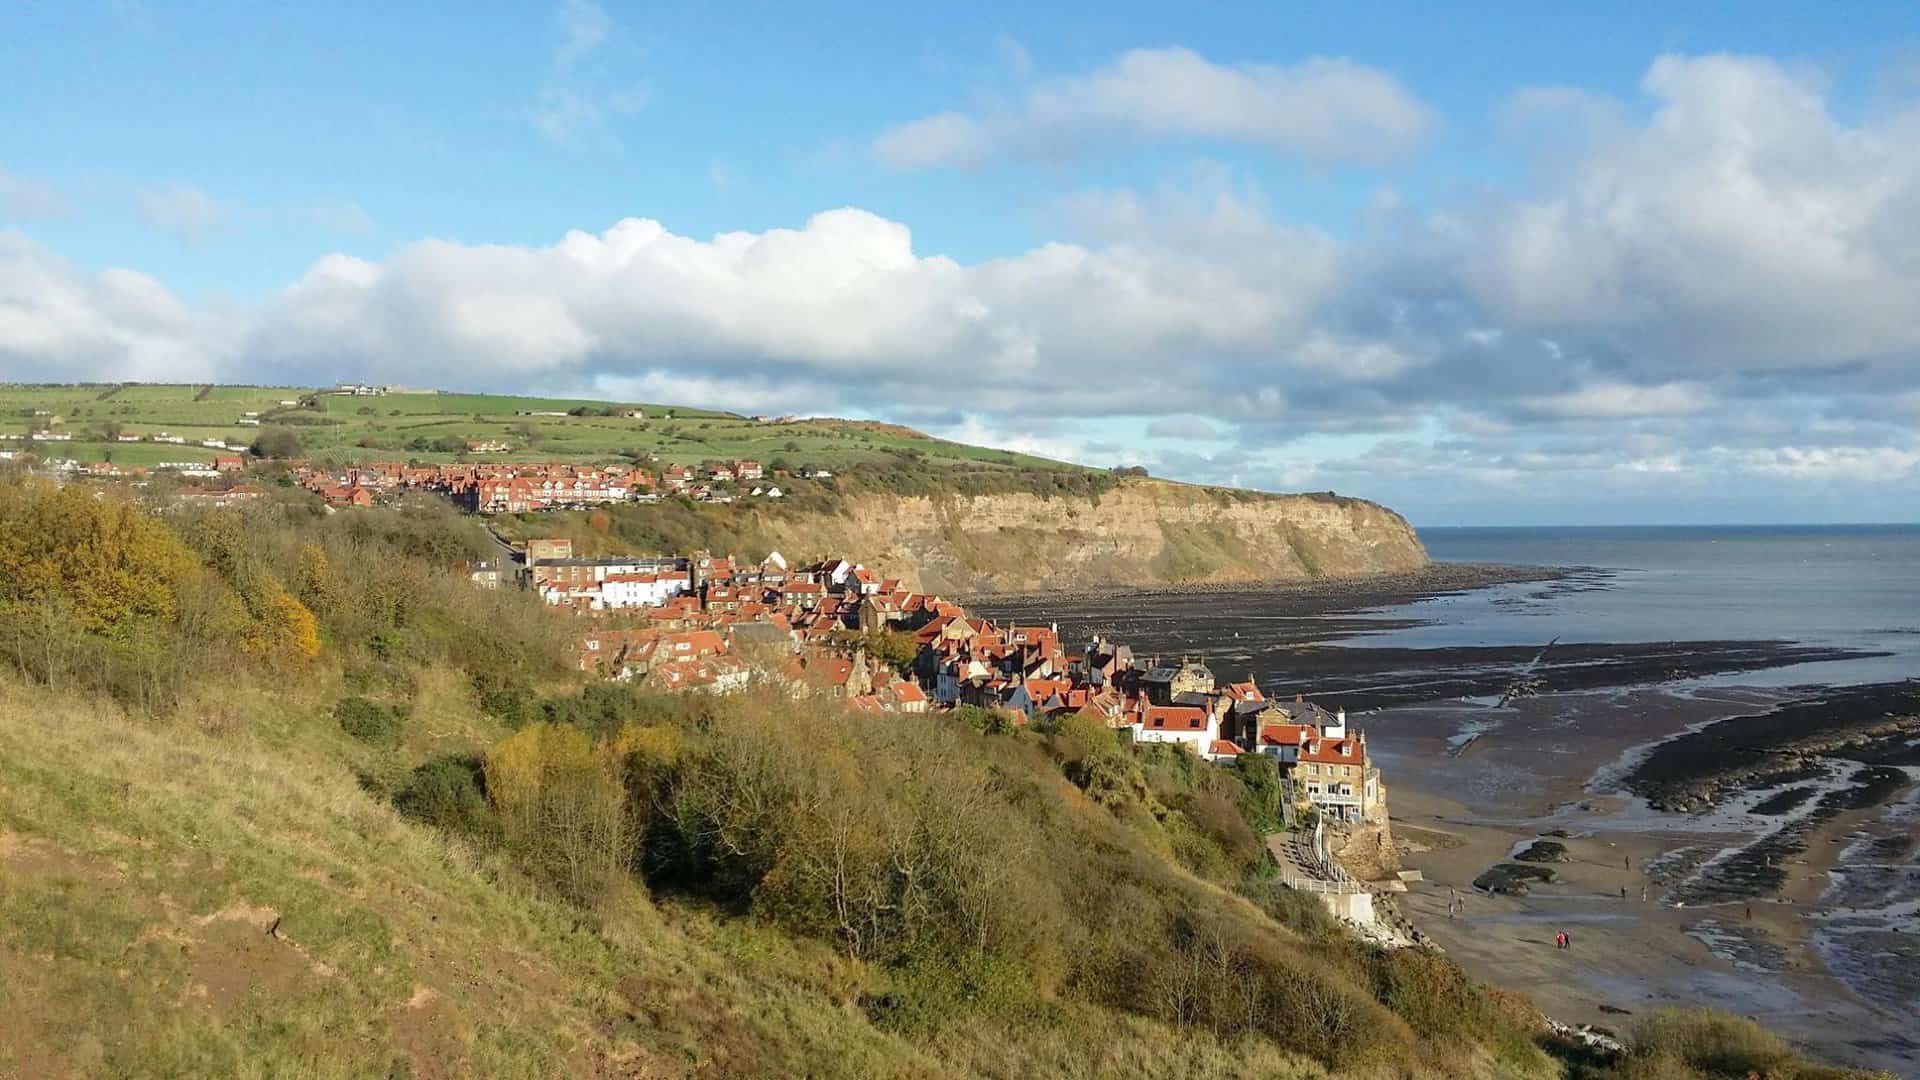 Looking down upon Robin Hood’s Bay from the Cleveland Way.